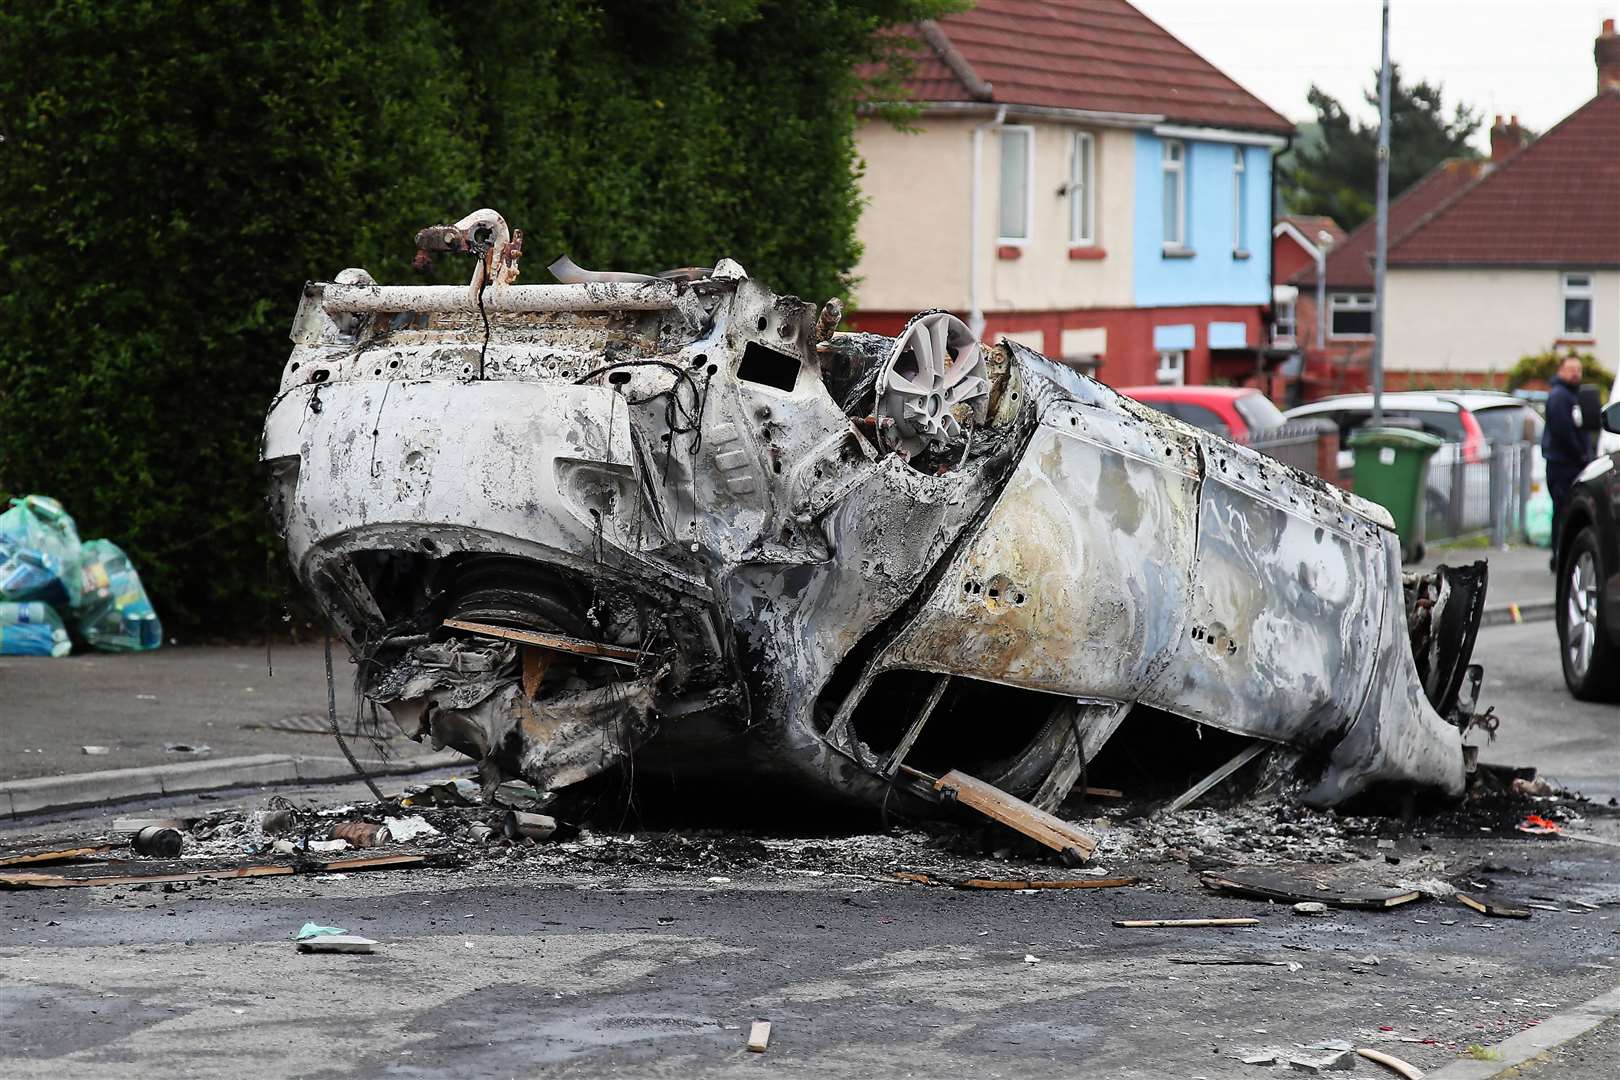 The car that was set alight in Ely, Cardiff, following the riot that broke out after two teenagers died in a crash (PA)